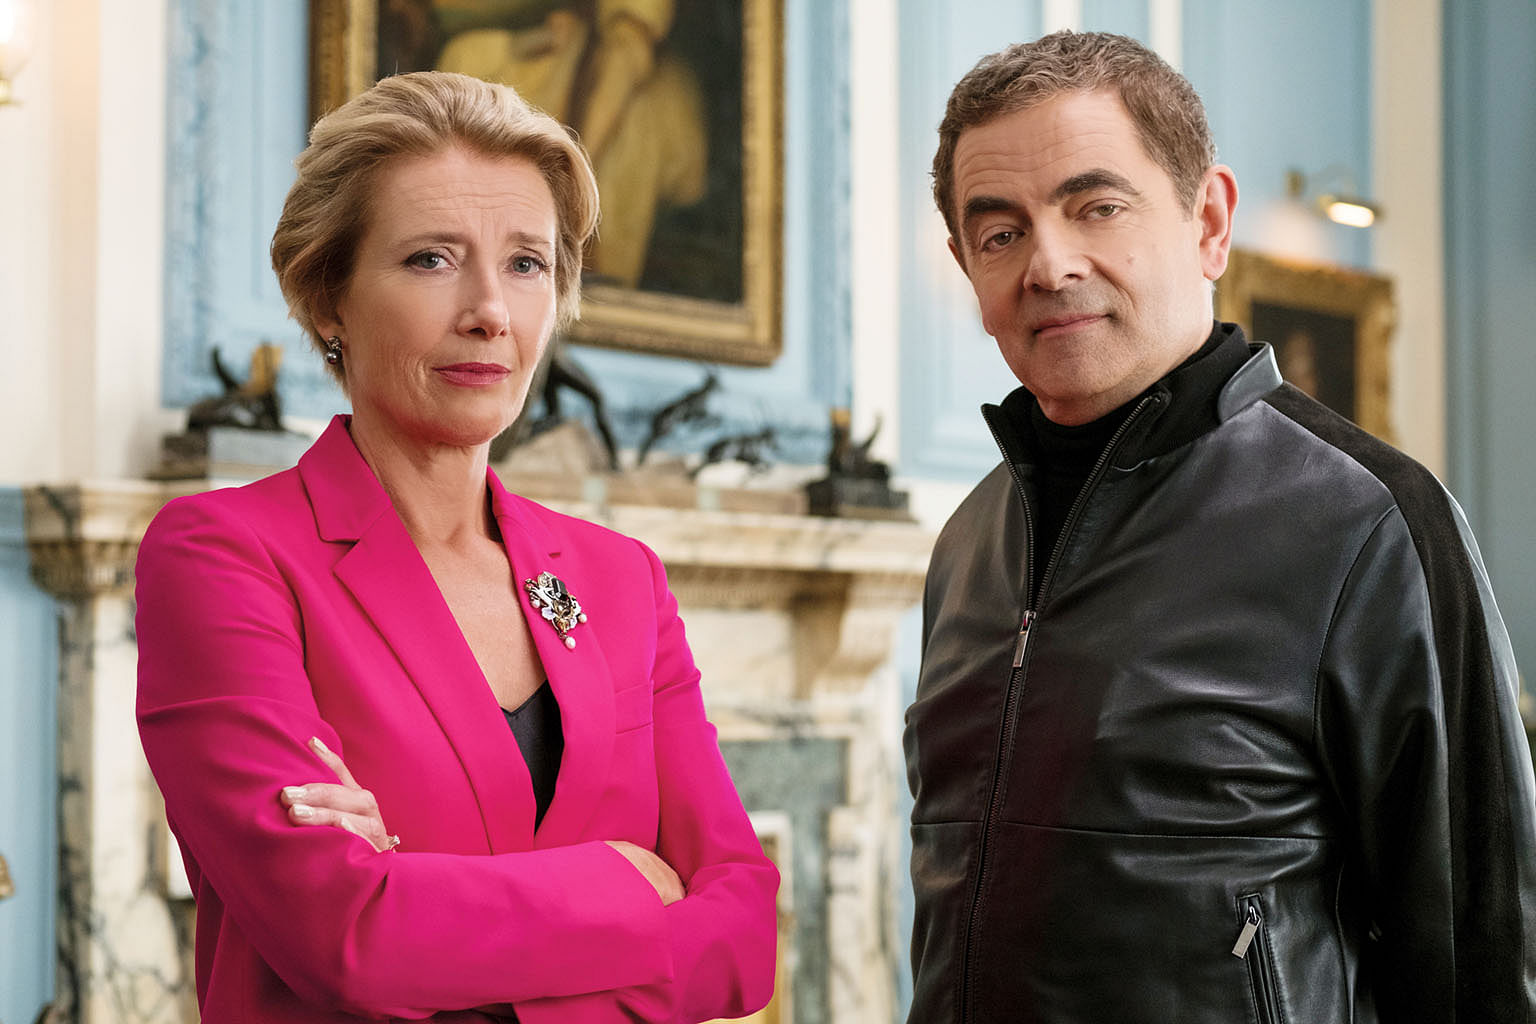 Emma Thompson (above, left) joins Rowan Atkinson, who plays the British secret service's last hope, in Johnny English Strikes Again (right).